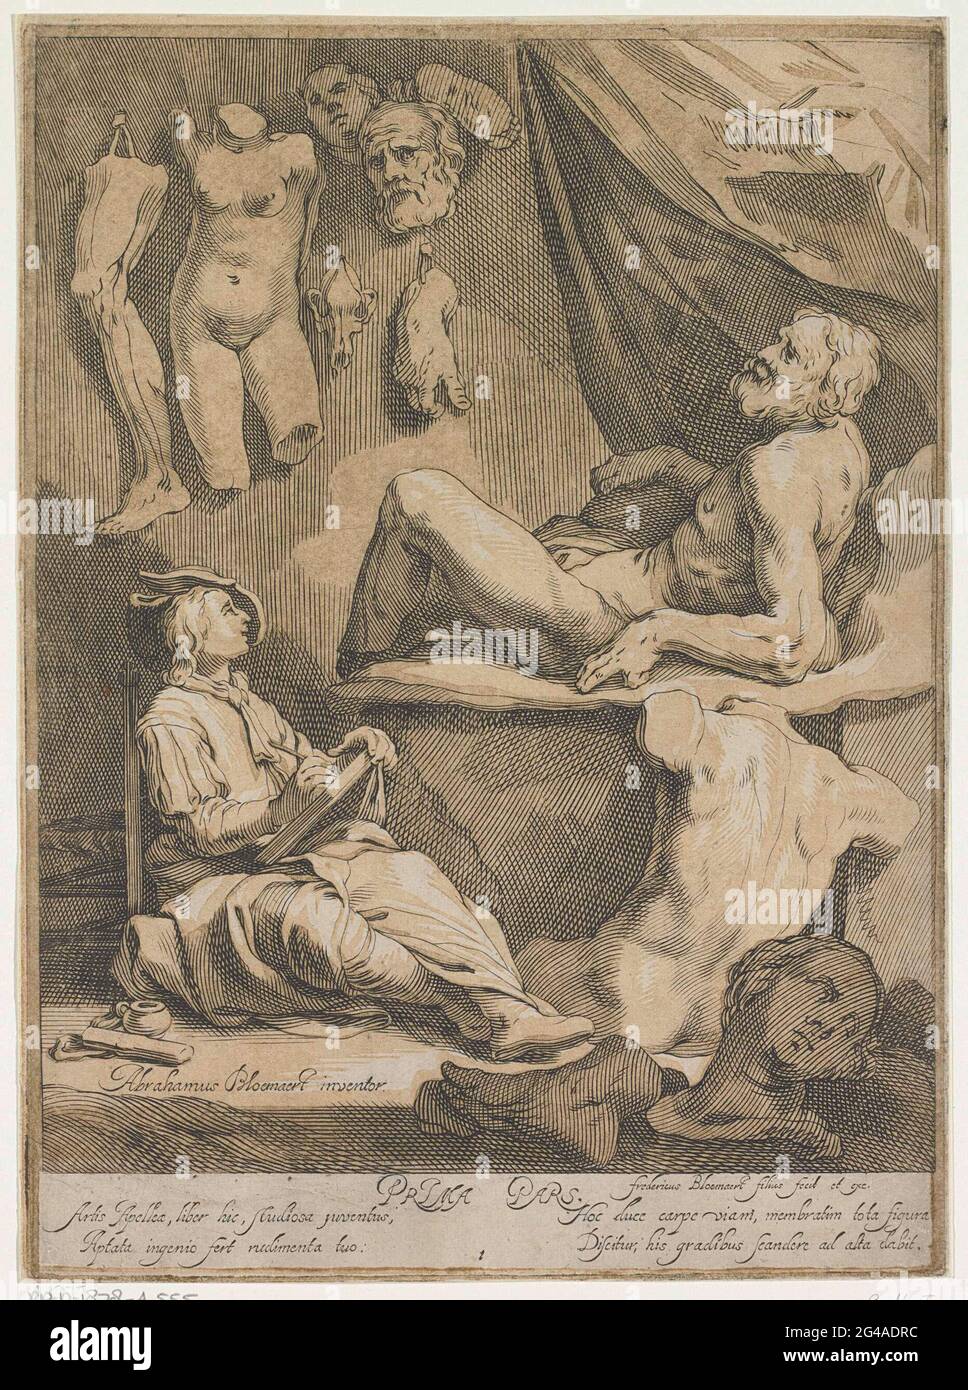 Title page of Oorspronkelyk en vermaard konstryk tekenboek. The role played by sculptural models in drawing instruction is explicitly conveyed on the title page of Abraham Bloemaert’s ‘konstryk tekenboek’ (artful drawing book), a manual for aspiring artists. Surrounded by casts of sculptures, a young artist is busy copying a sculpture of an old man reclining. Hanging on the wall are plaster models of larger than life-size body parts. Frederik Bloemaert made this title page for his father’s book. Stock Photo